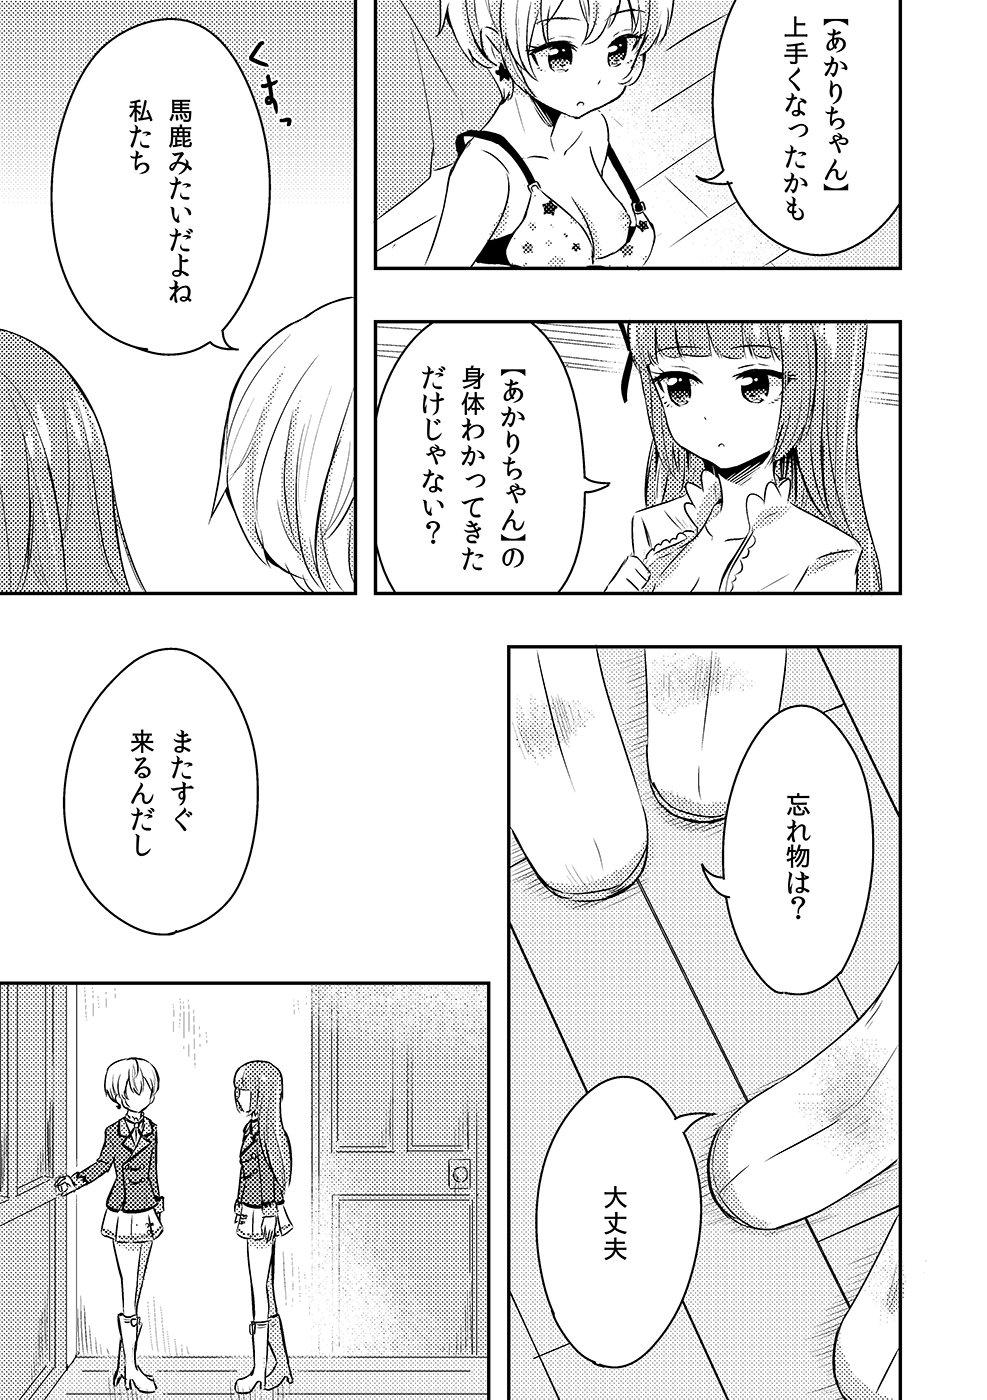 Large Who contributed to loveless sex joint two years ago! Yuusumi manga. - Aikatsu Whores - Page 5